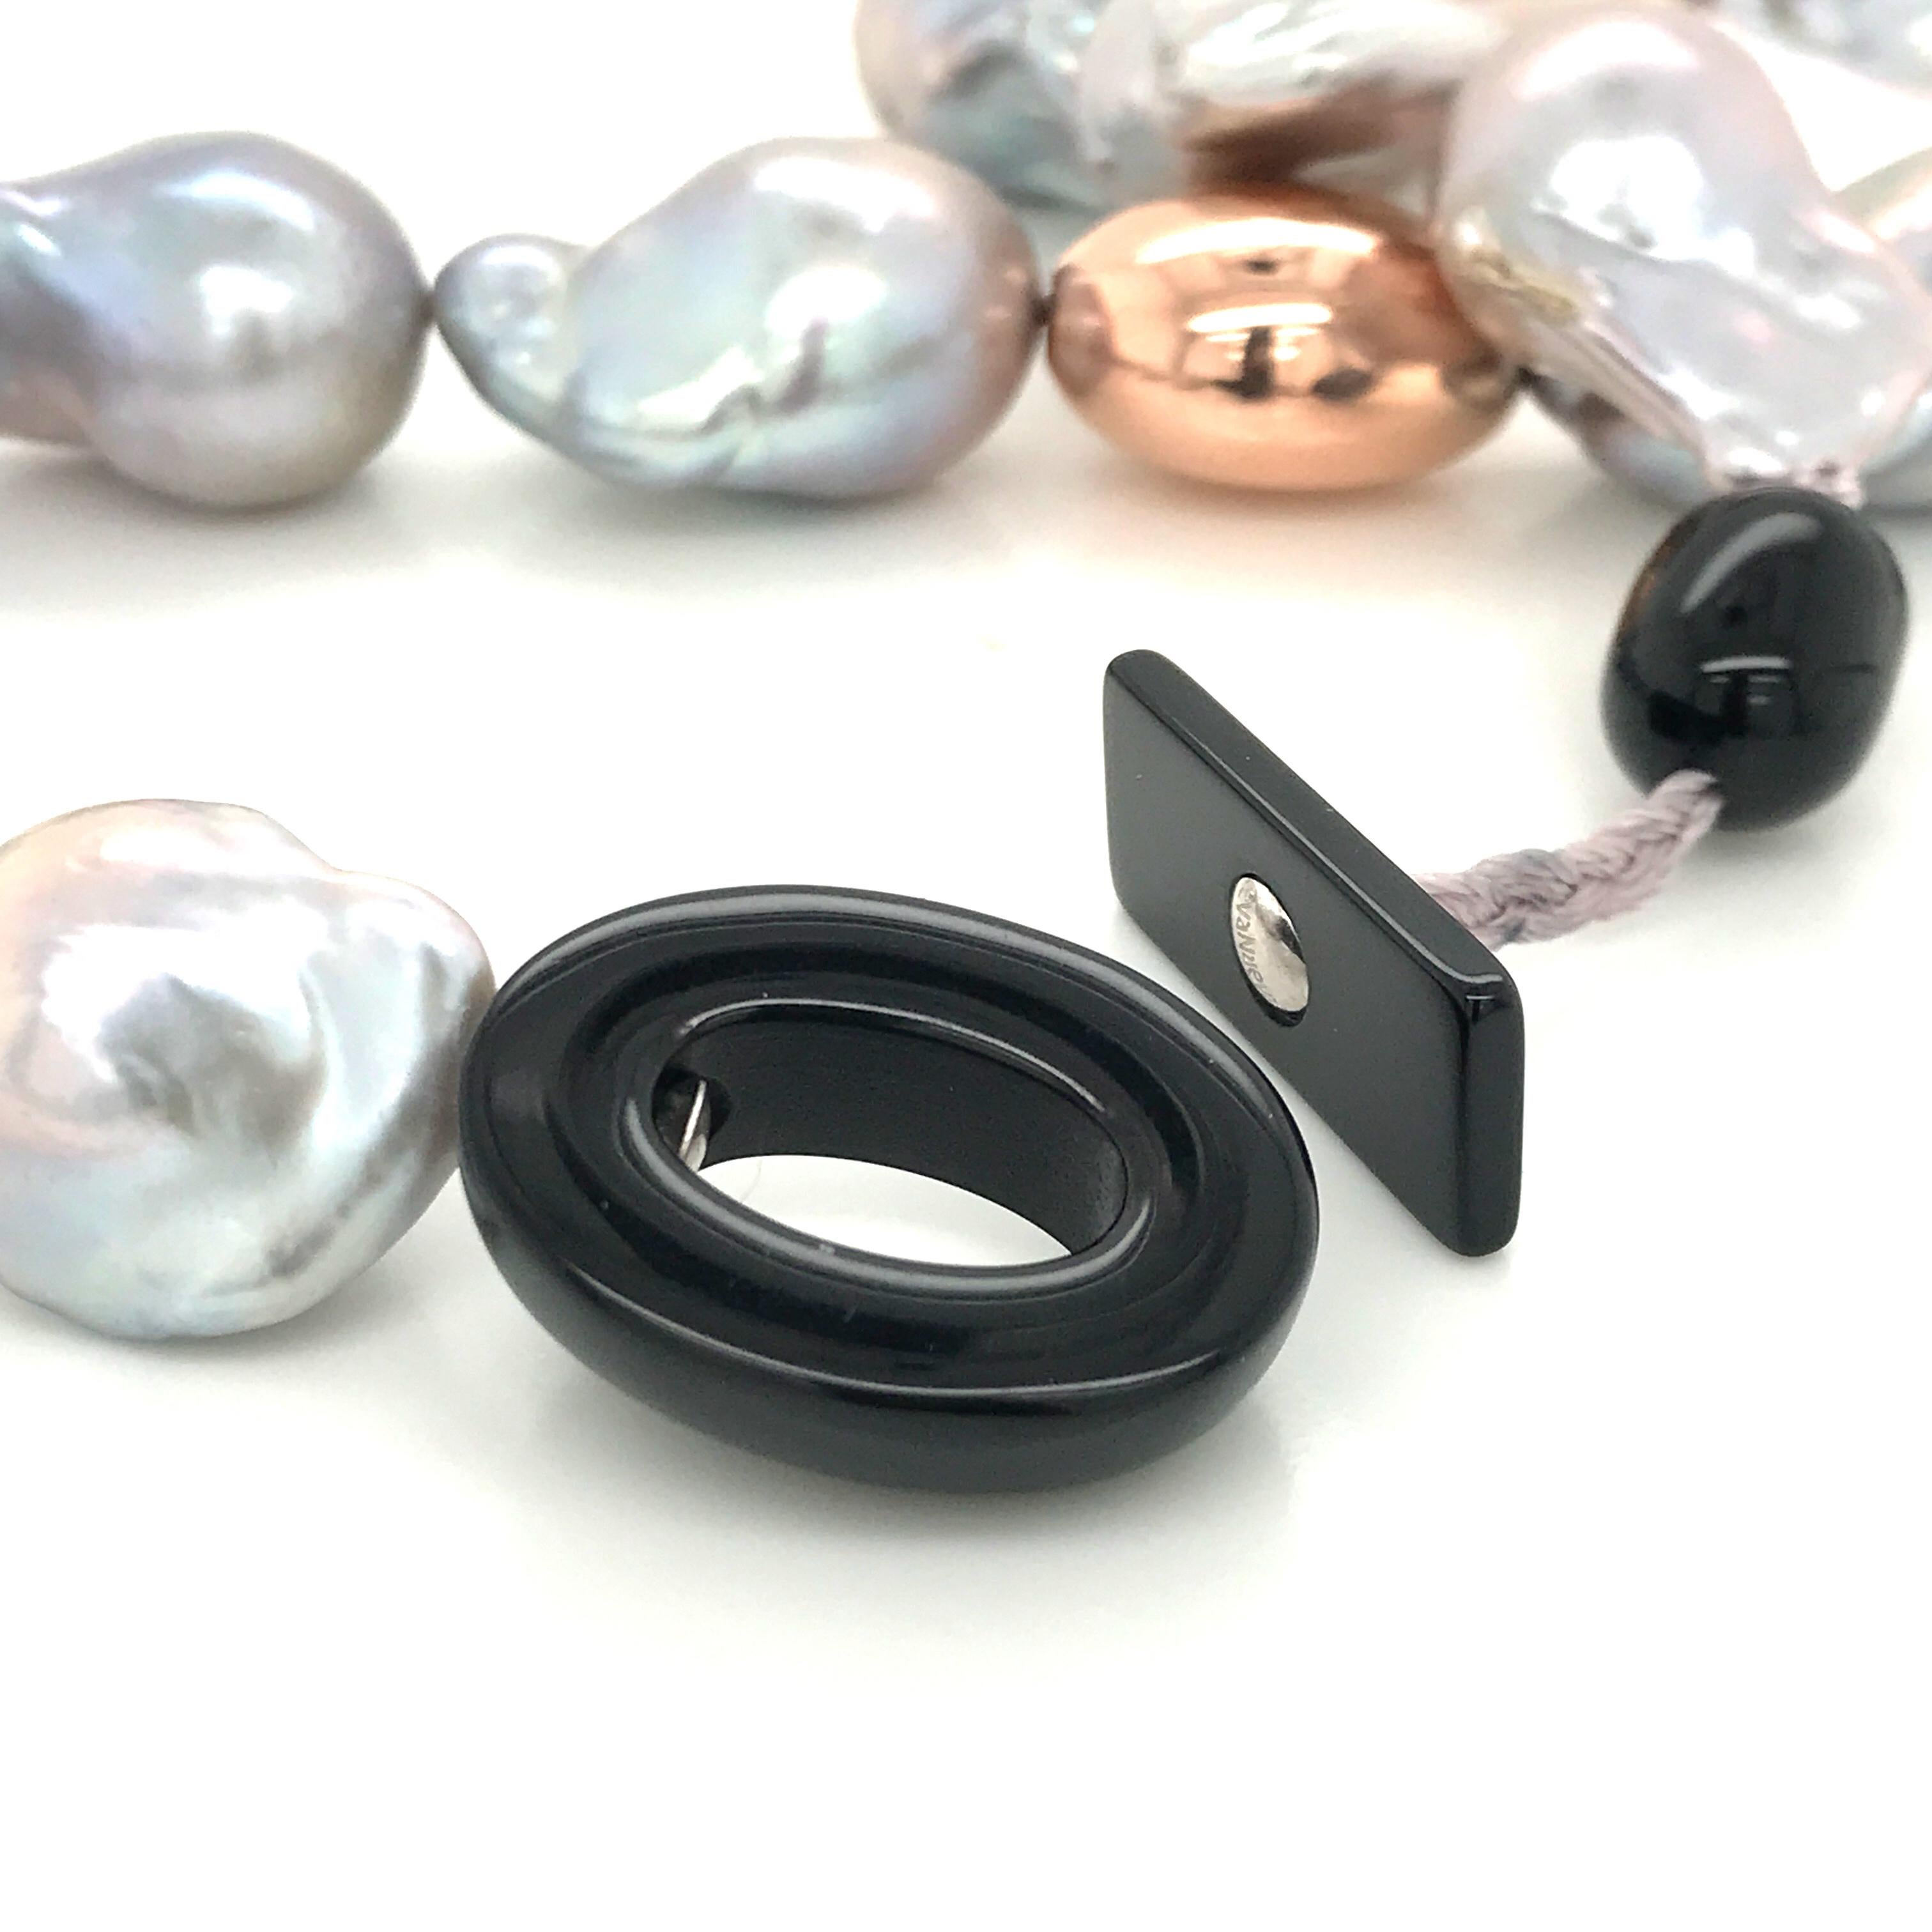 South Sea Baroque Grey Pearl with Pink gold Necklace
Baroque Pearl 15/16 mm 
Pink Gold 18 k 2 grams
Bakelite Claps